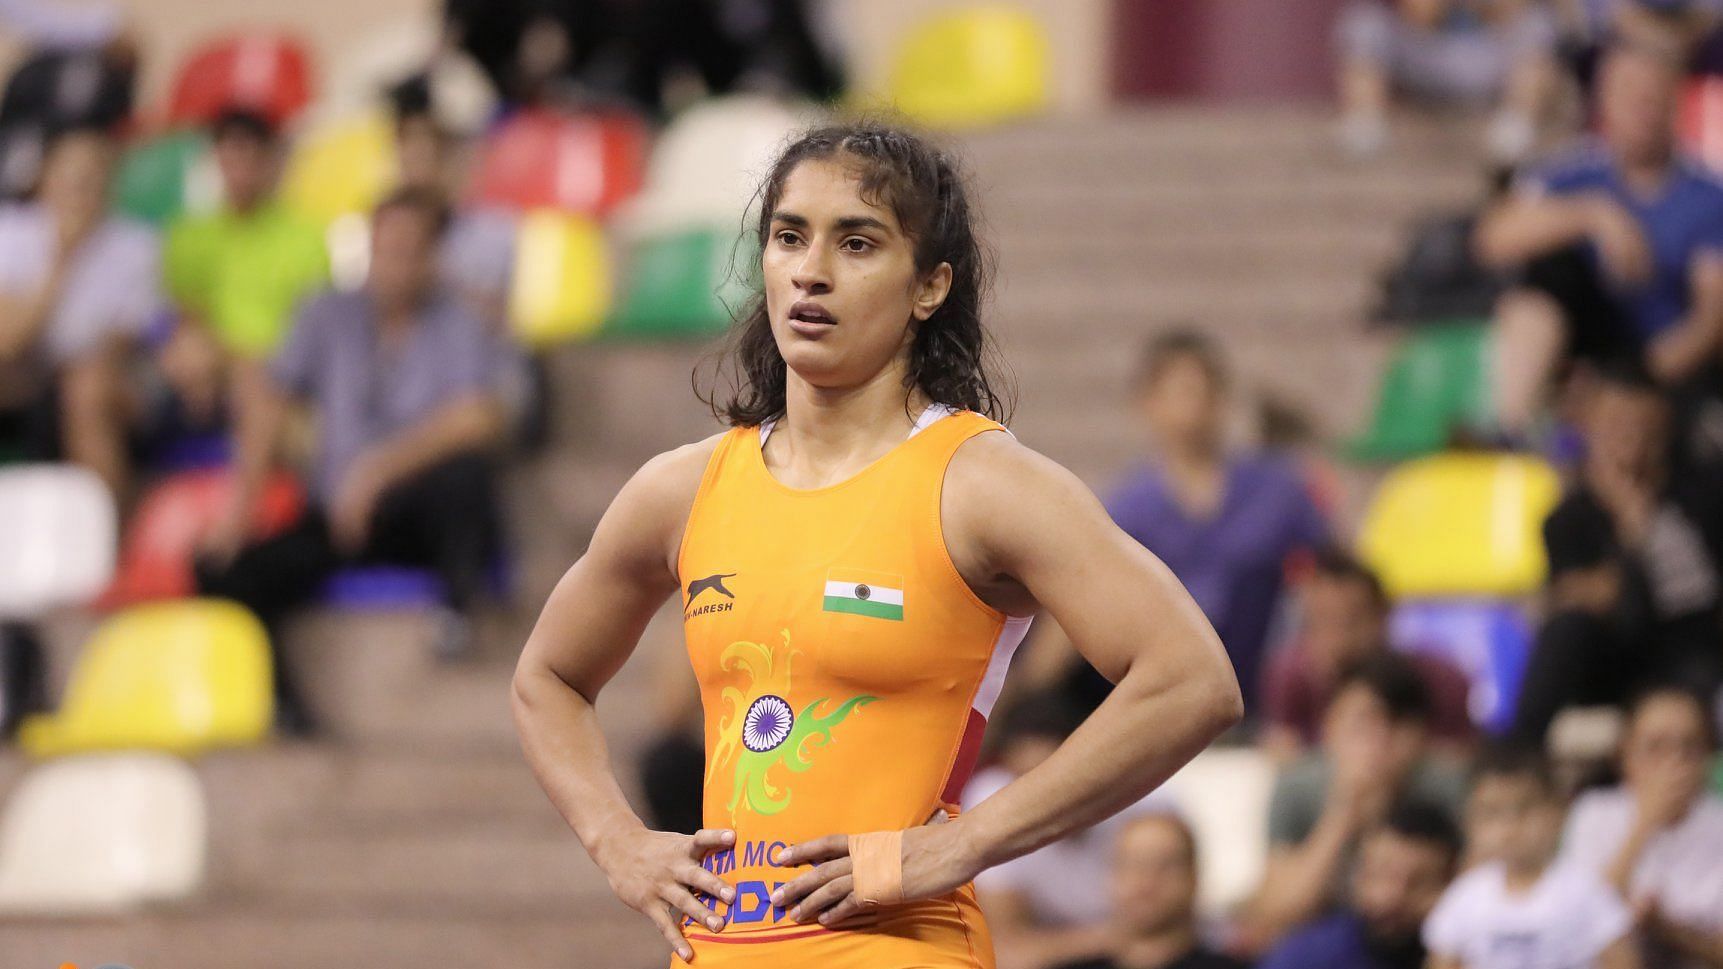 Vinesh Phogat is one of India’s biggest medal hopes at the upcoming Tokyo Olympics.